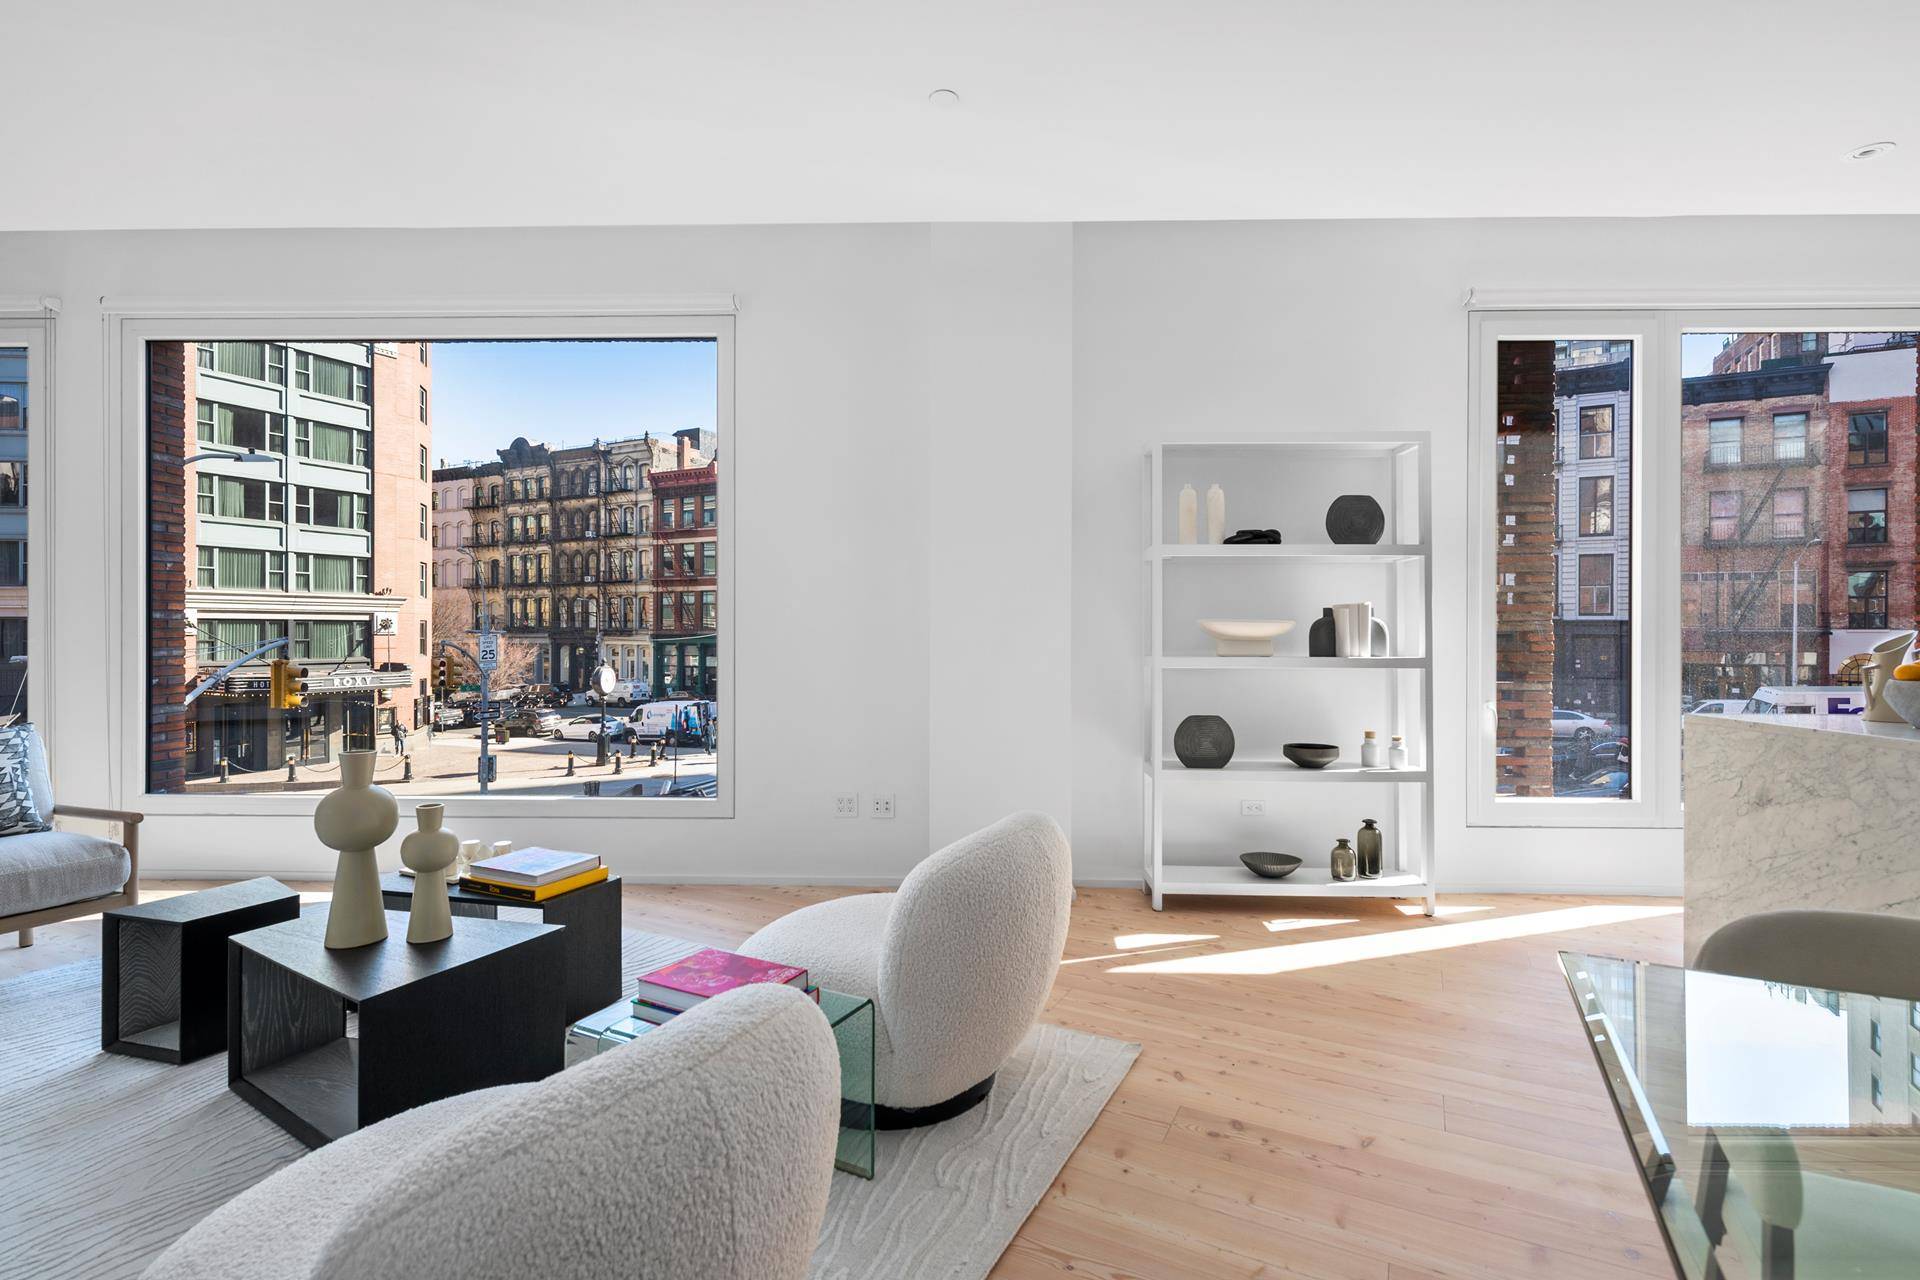 Residence 2North is an 1, 880 square foot, three bedroom, two and a half bath floor thru loft like home overlooking the iconic TriBeCa triangle.